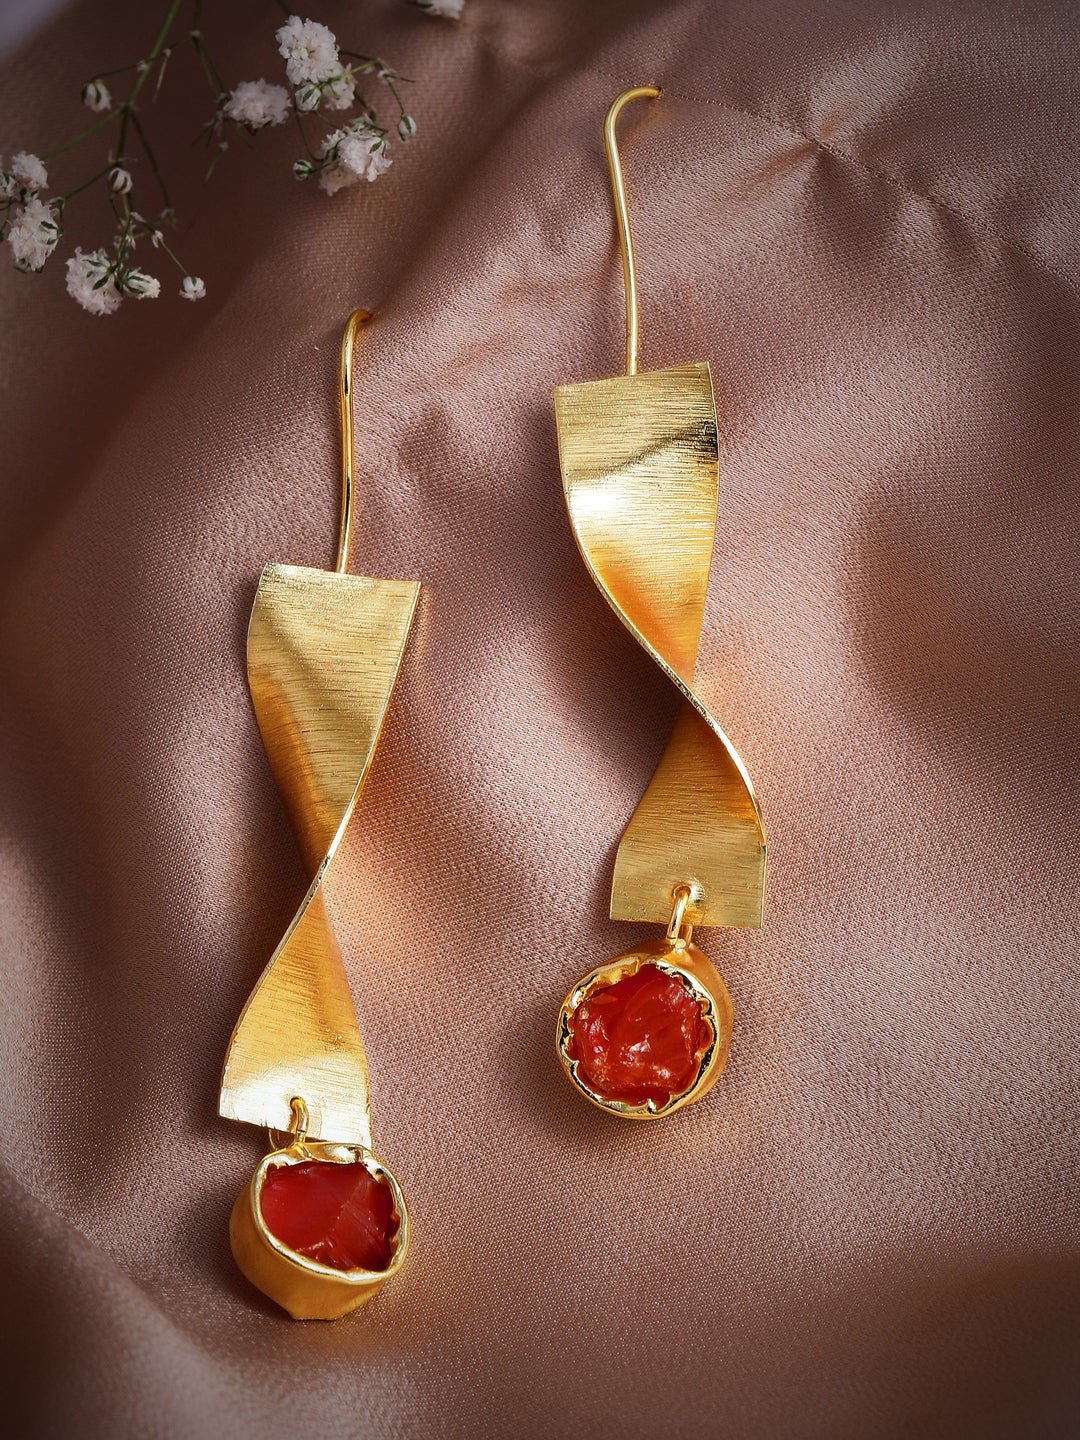 Rubans Voguish 18K Gold Plated On Copper Handcrafted Ribbion Twisted Dangle Earrings. Earrings